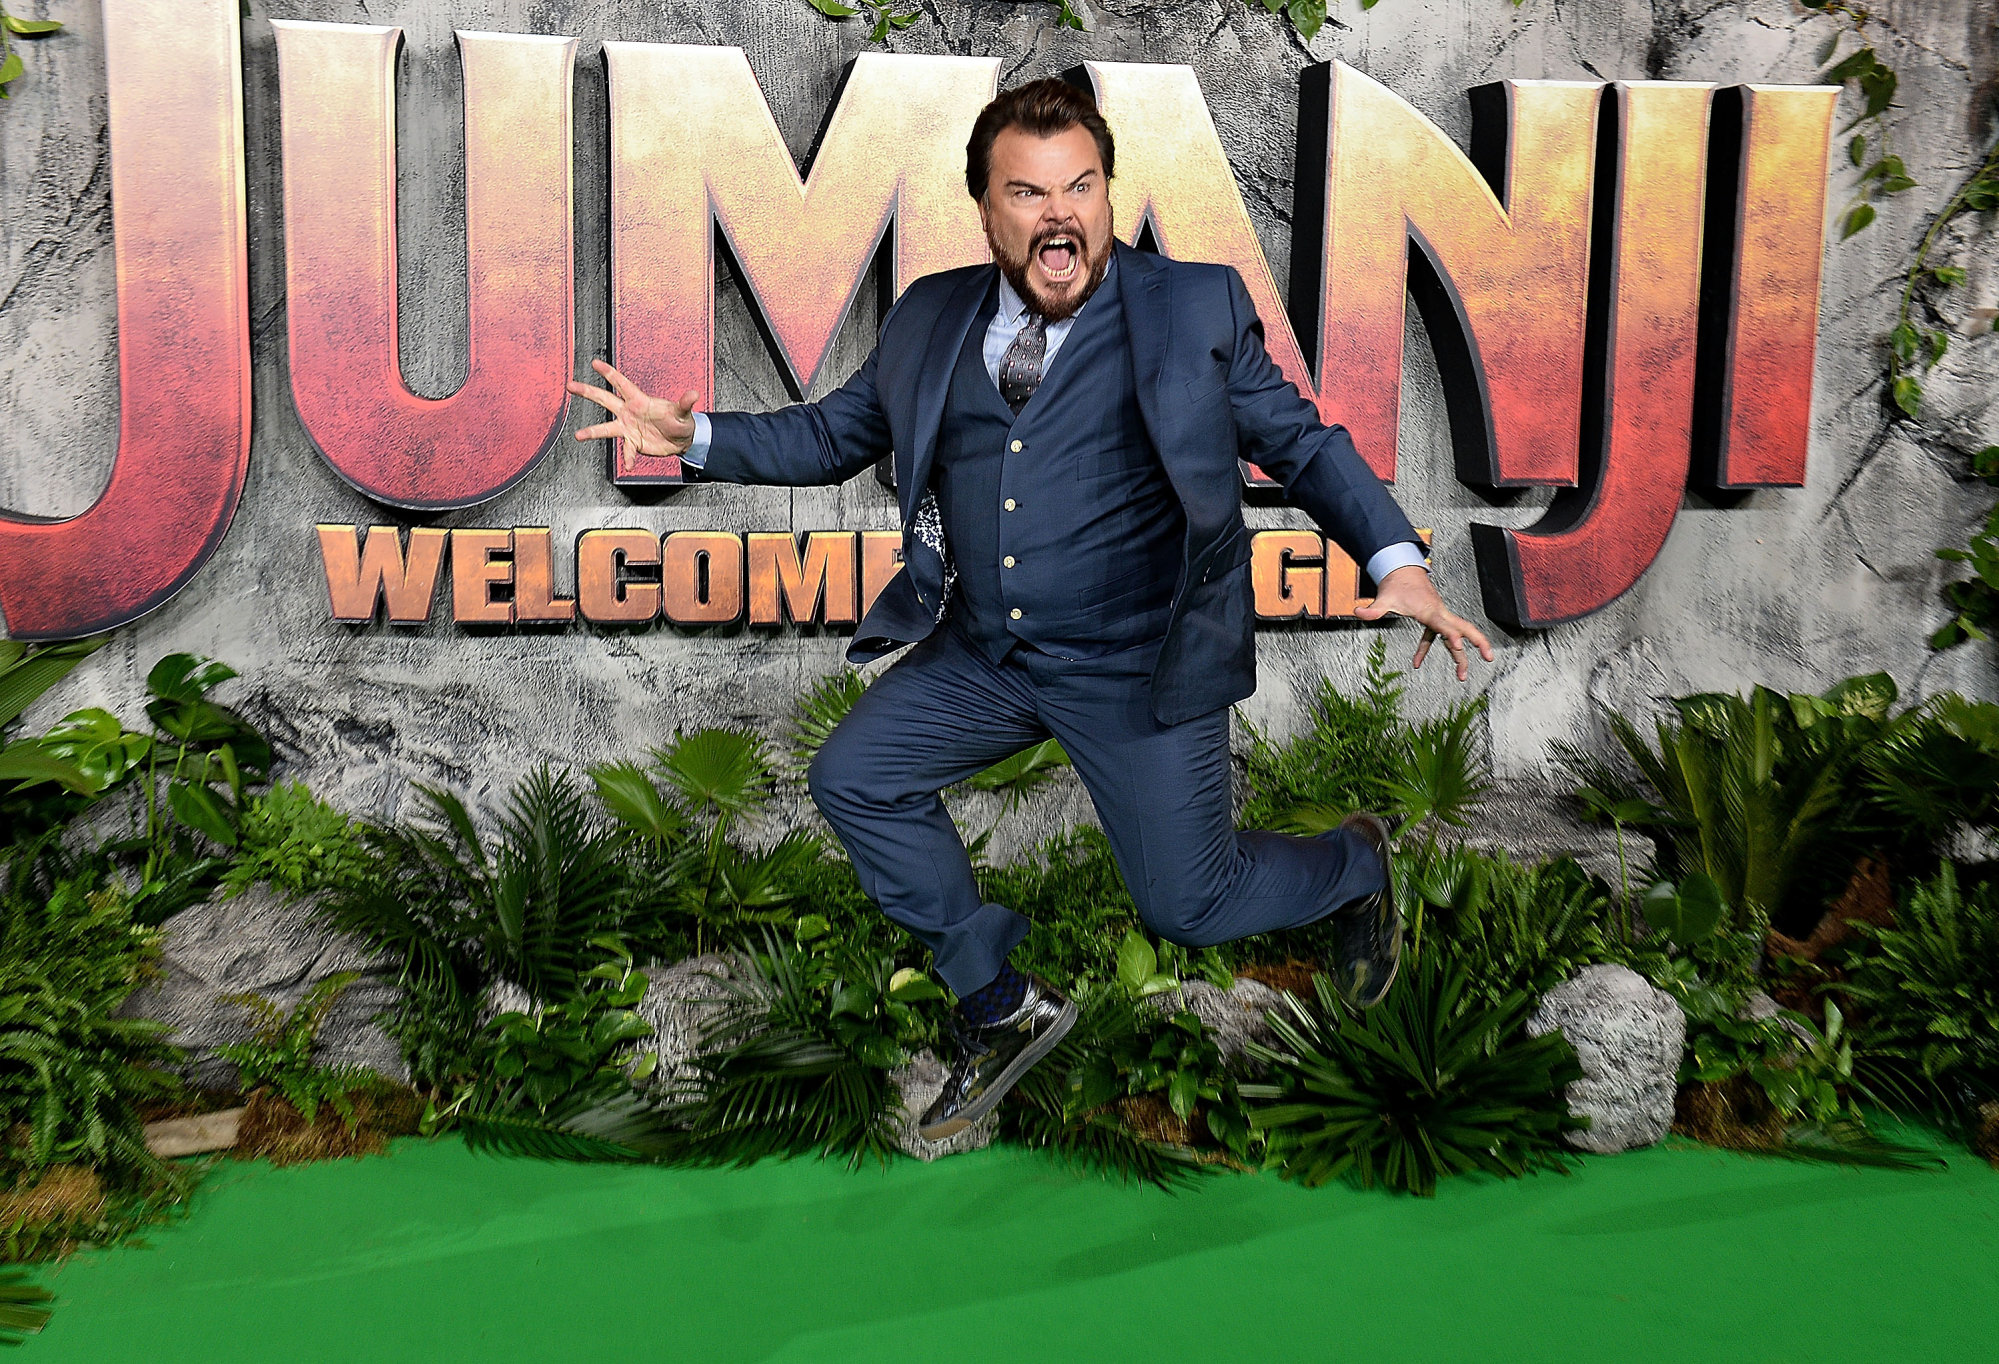 Jack Black attending the Jumanji: Welcome to the Jungle Premiere